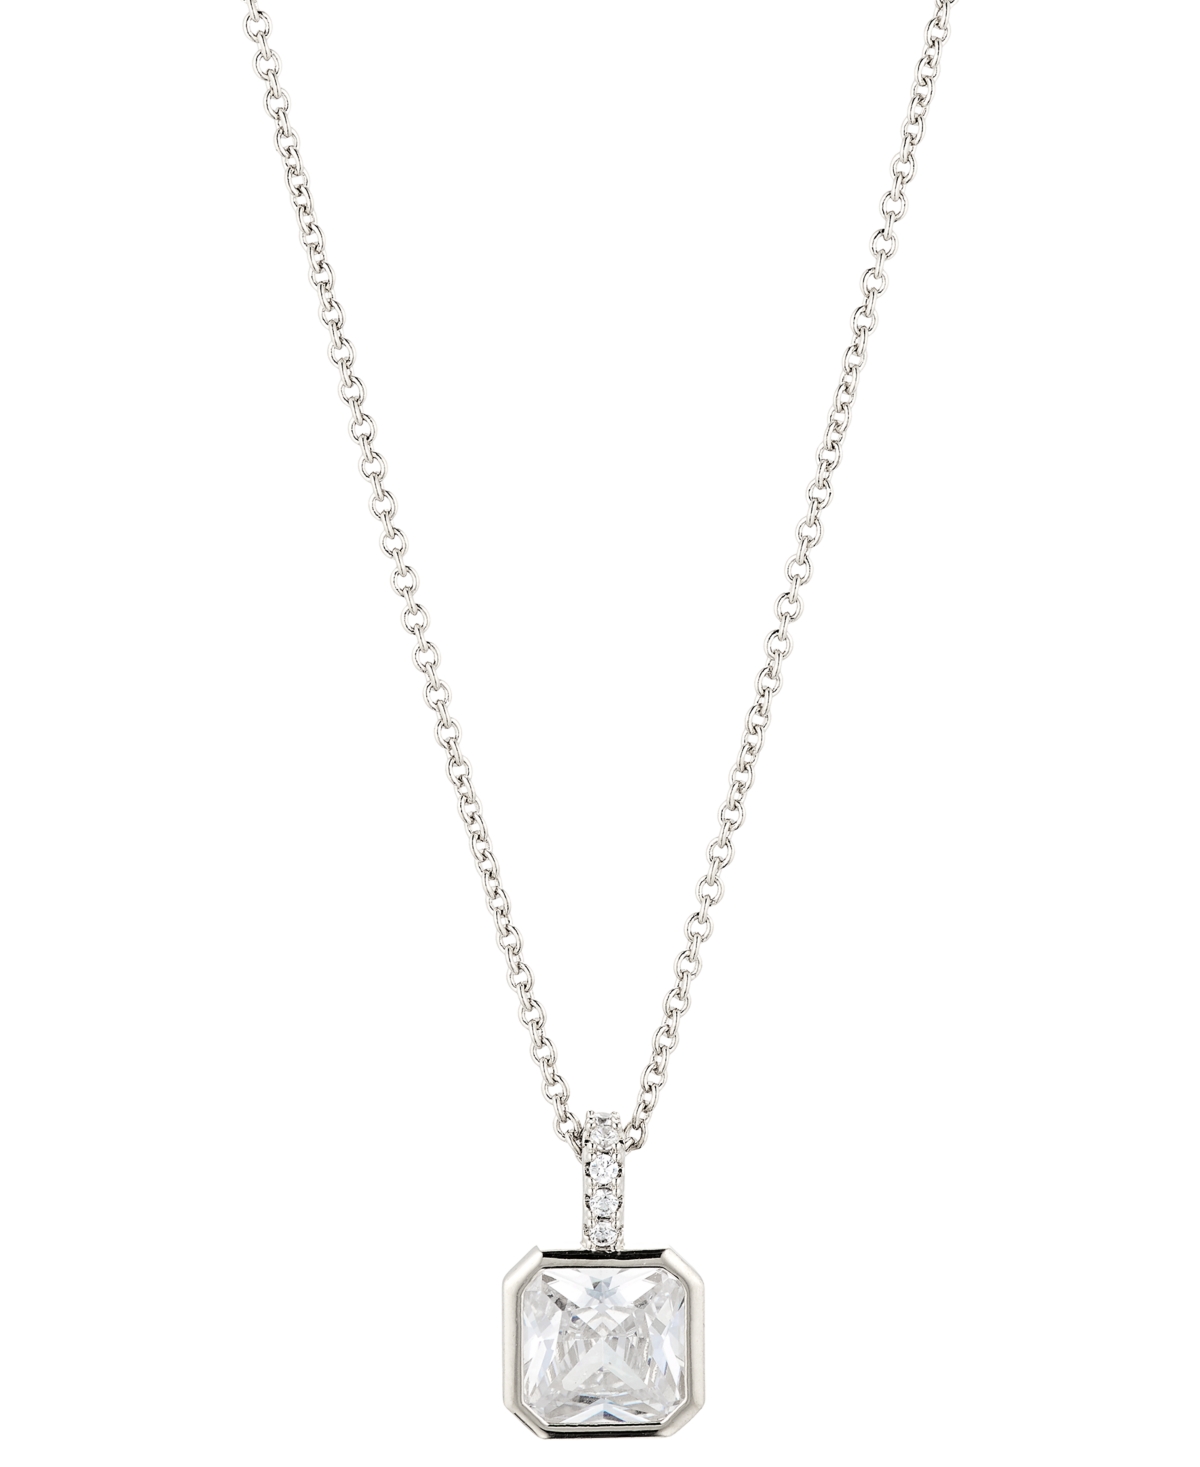 Silver-Tone Radiant-Cut Cubic Zirconia Pendant Necklace, 16" + 2" extender, Created For Macy's - Silver